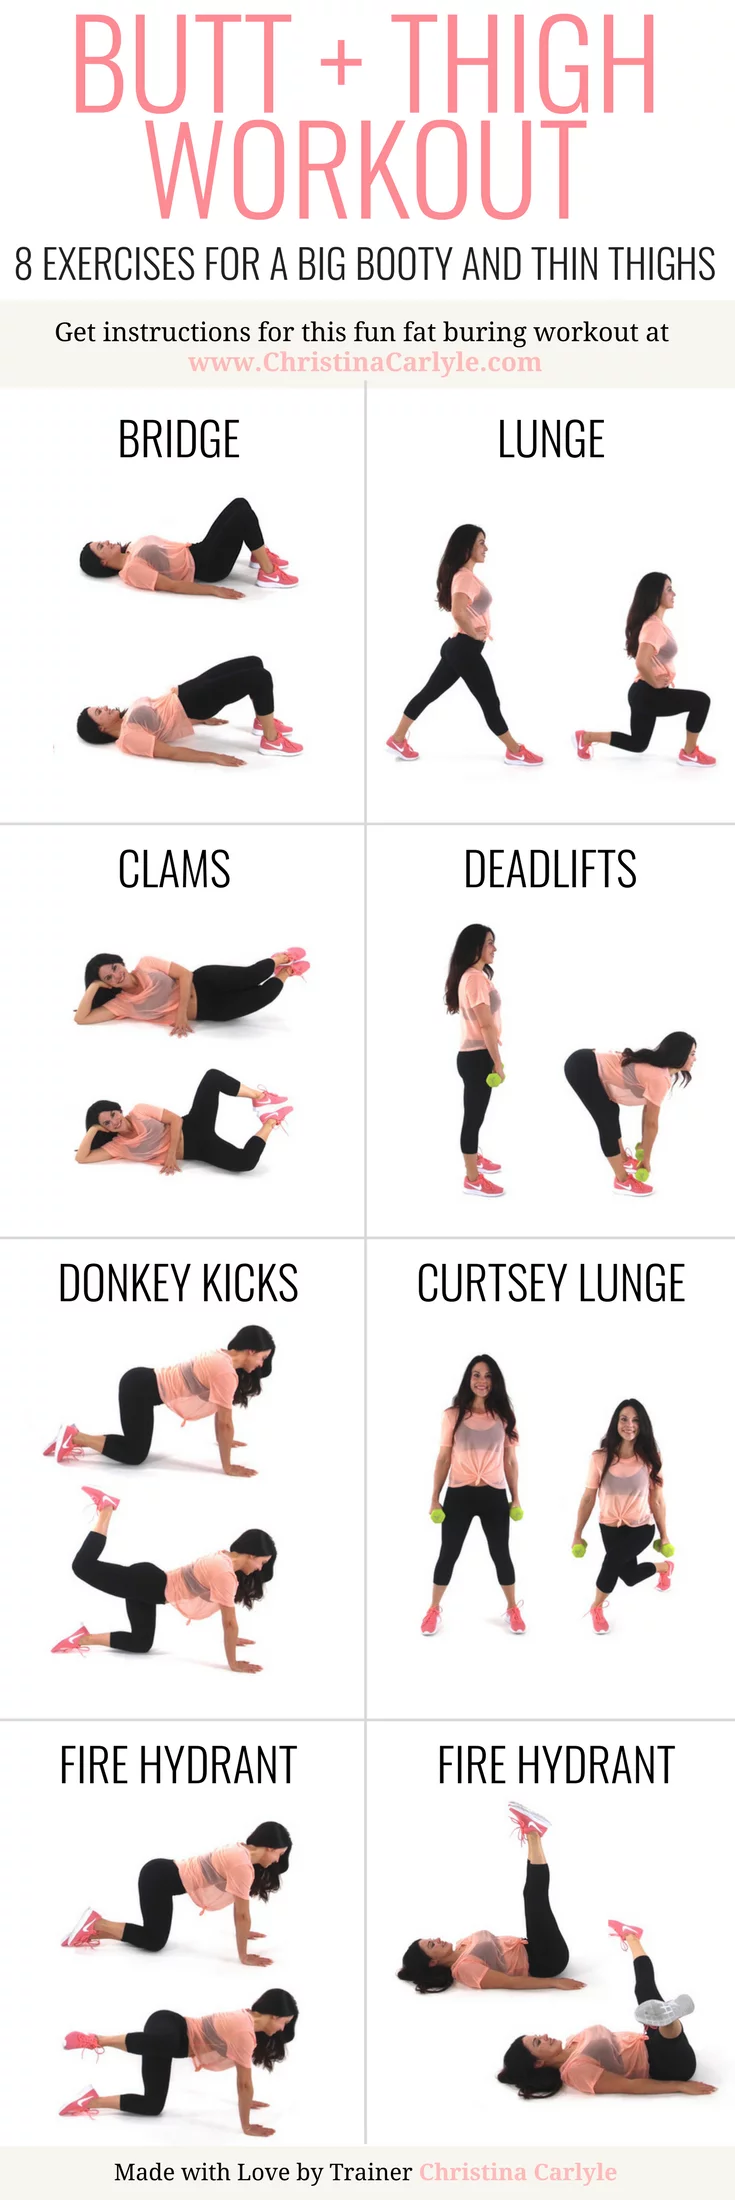 Butt and Thigh Workout  Christina Carlyle  Weight Loss Programs and Workouts for Women